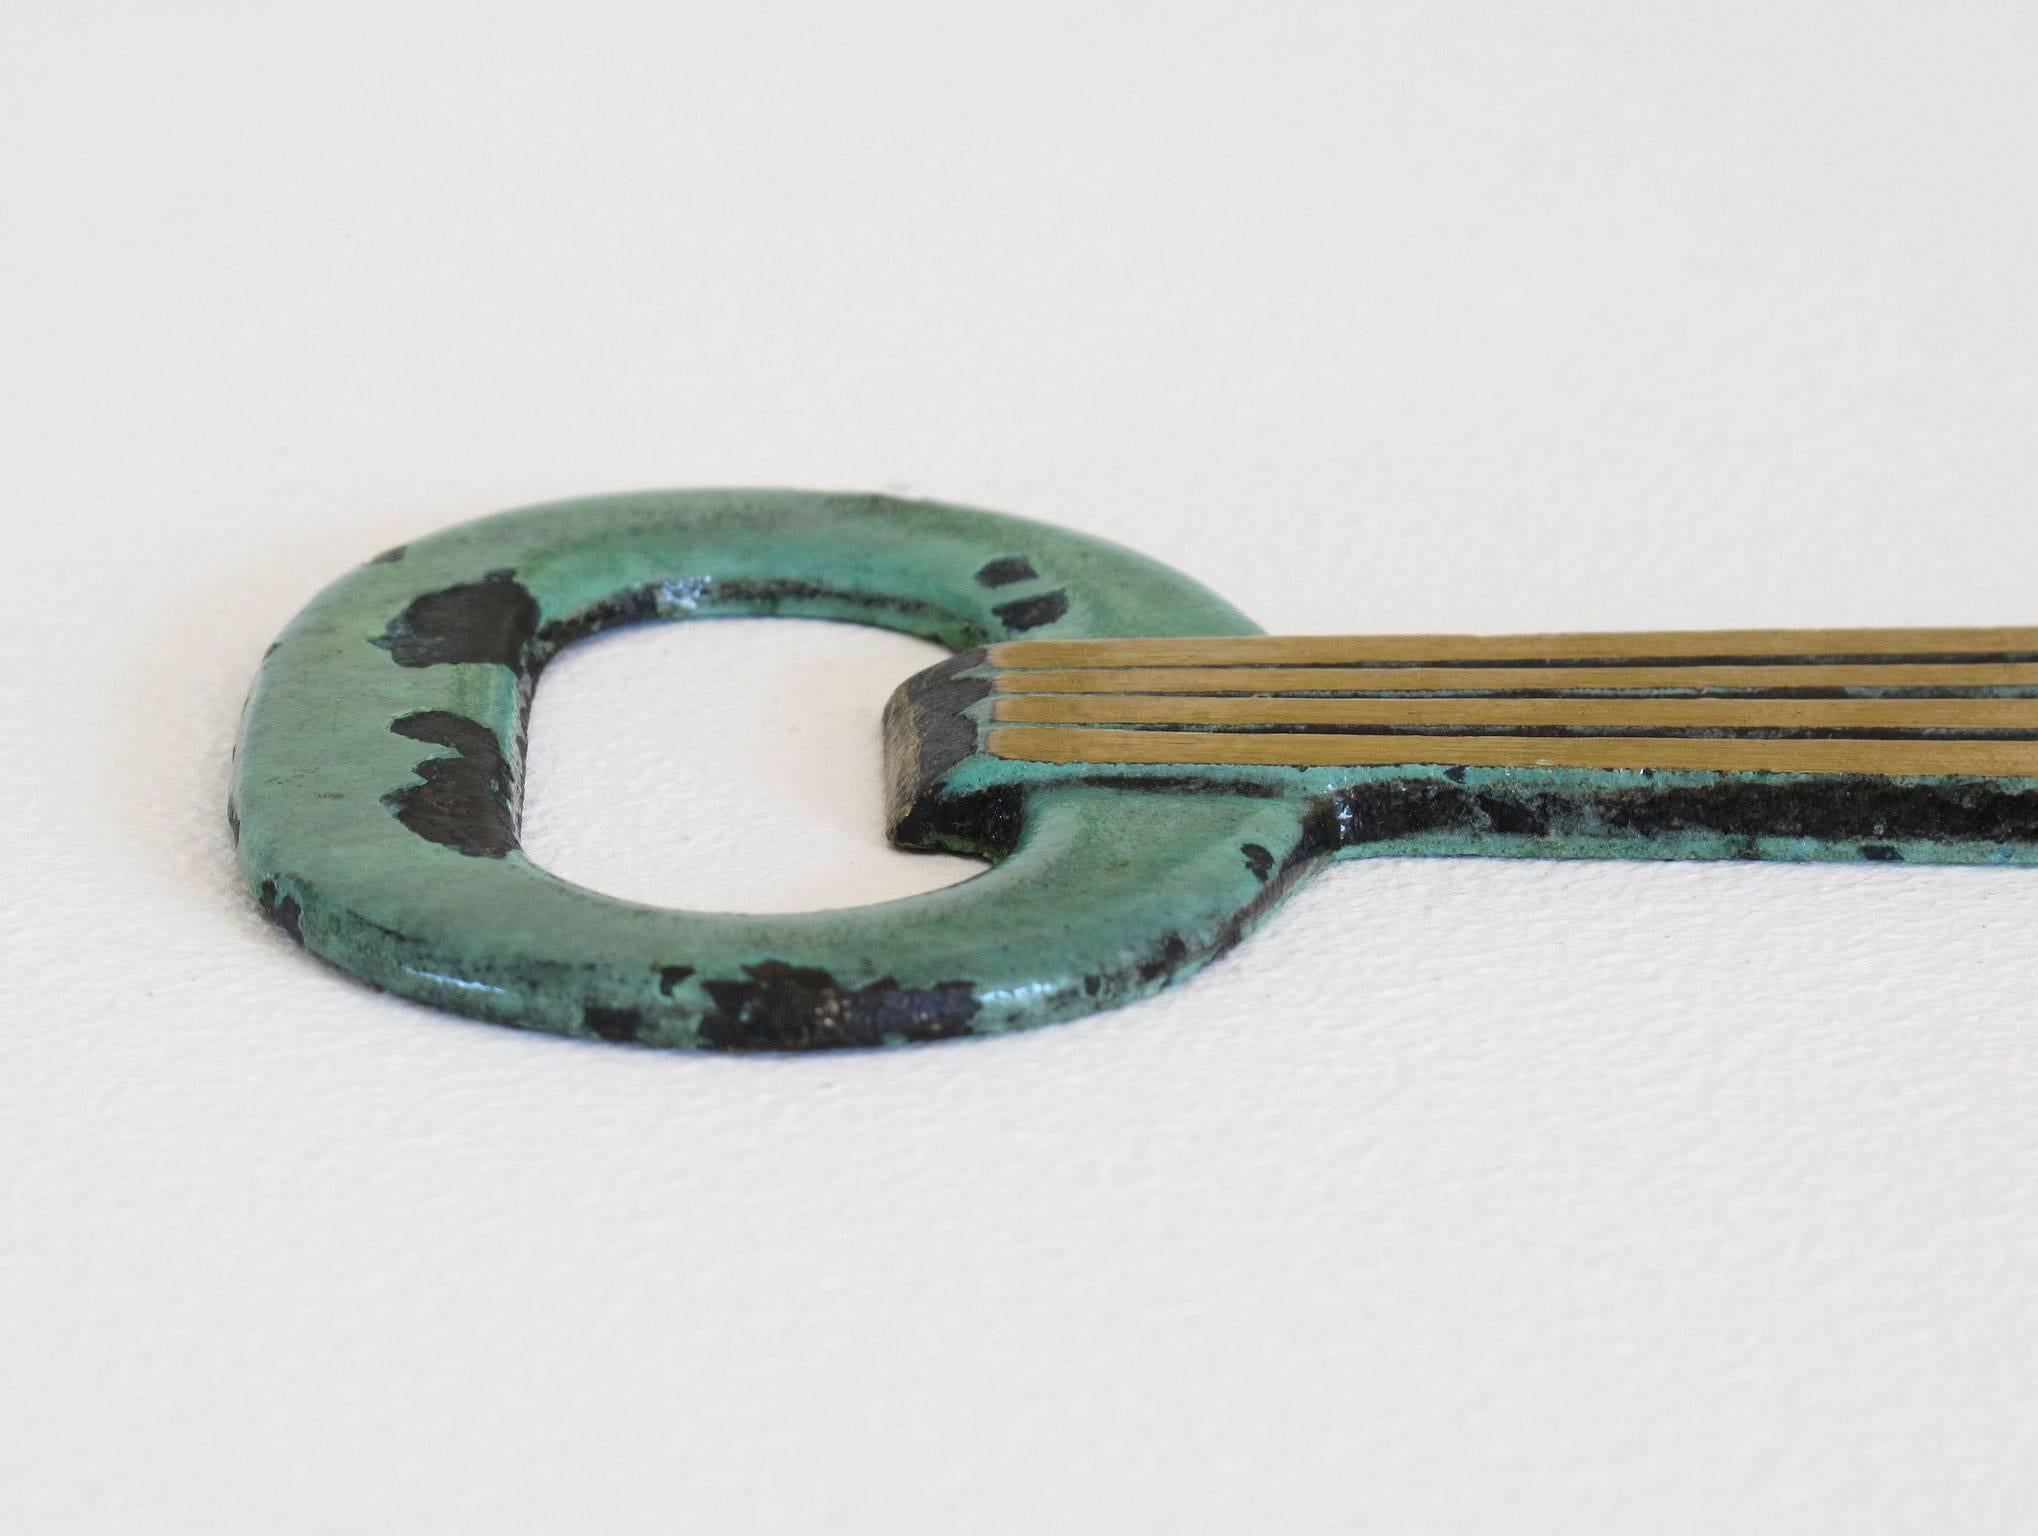 Solid Brass Key Shaped Bottle Opener with Verdigris Patina In Good Condition For Sale In Los Angeles, CA